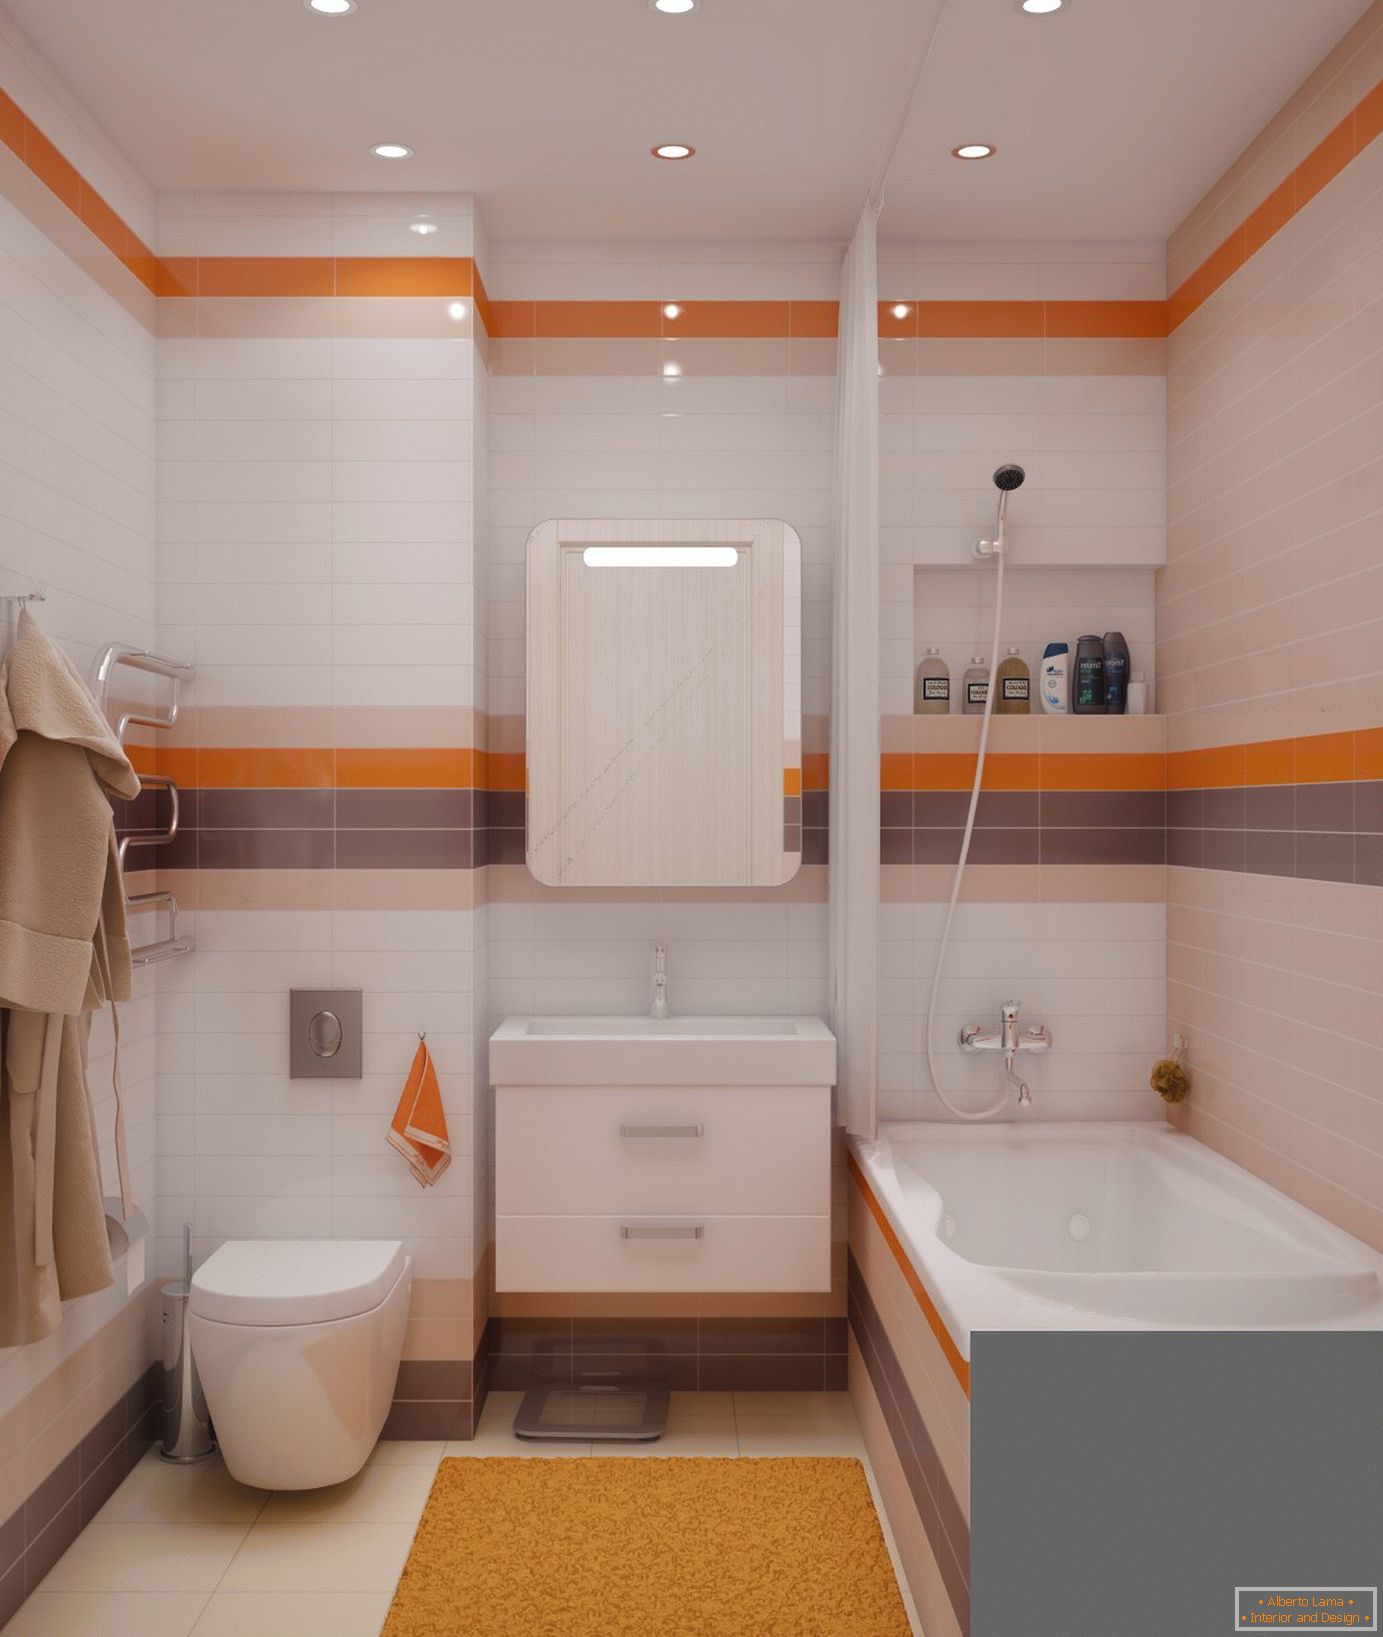 Combined bathroom or separate: advantages and disadvantages